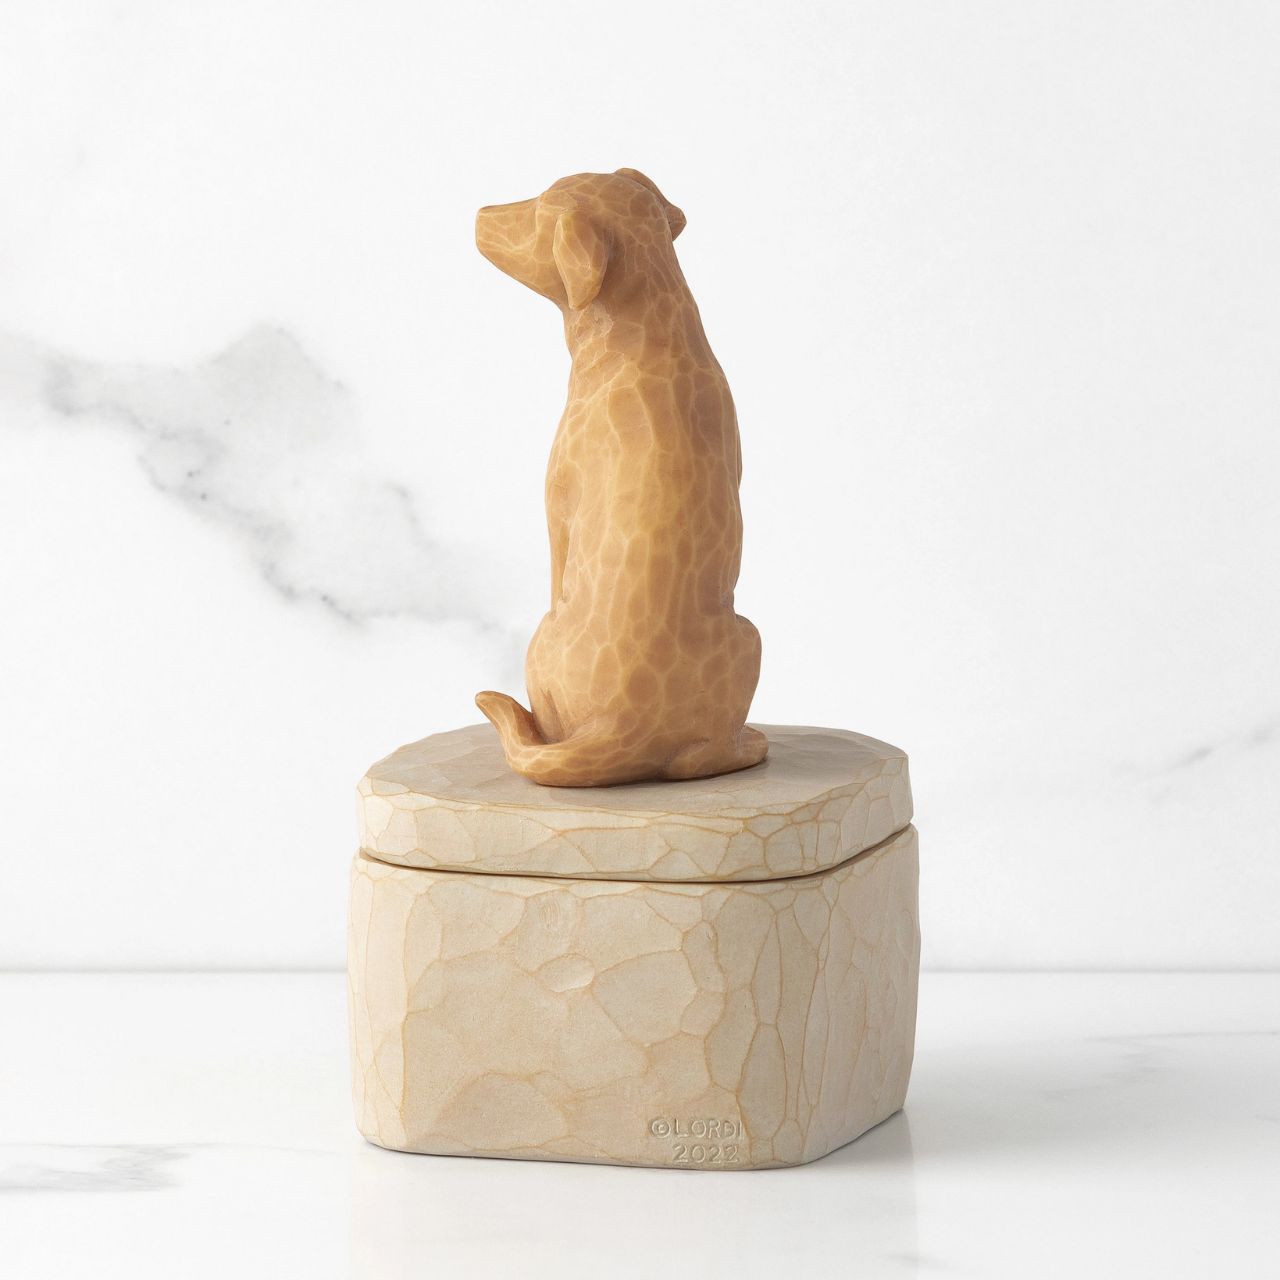 Love my Dog (Golden) Box by Willow Tree  A gift for those who love dogs and treasure their companionship. Keepsake Boxes are small, sweet places to keep jewellery, accessories, notes. Inside, the bottom of this box reveals the sentiment, "Always with me, full of personality".